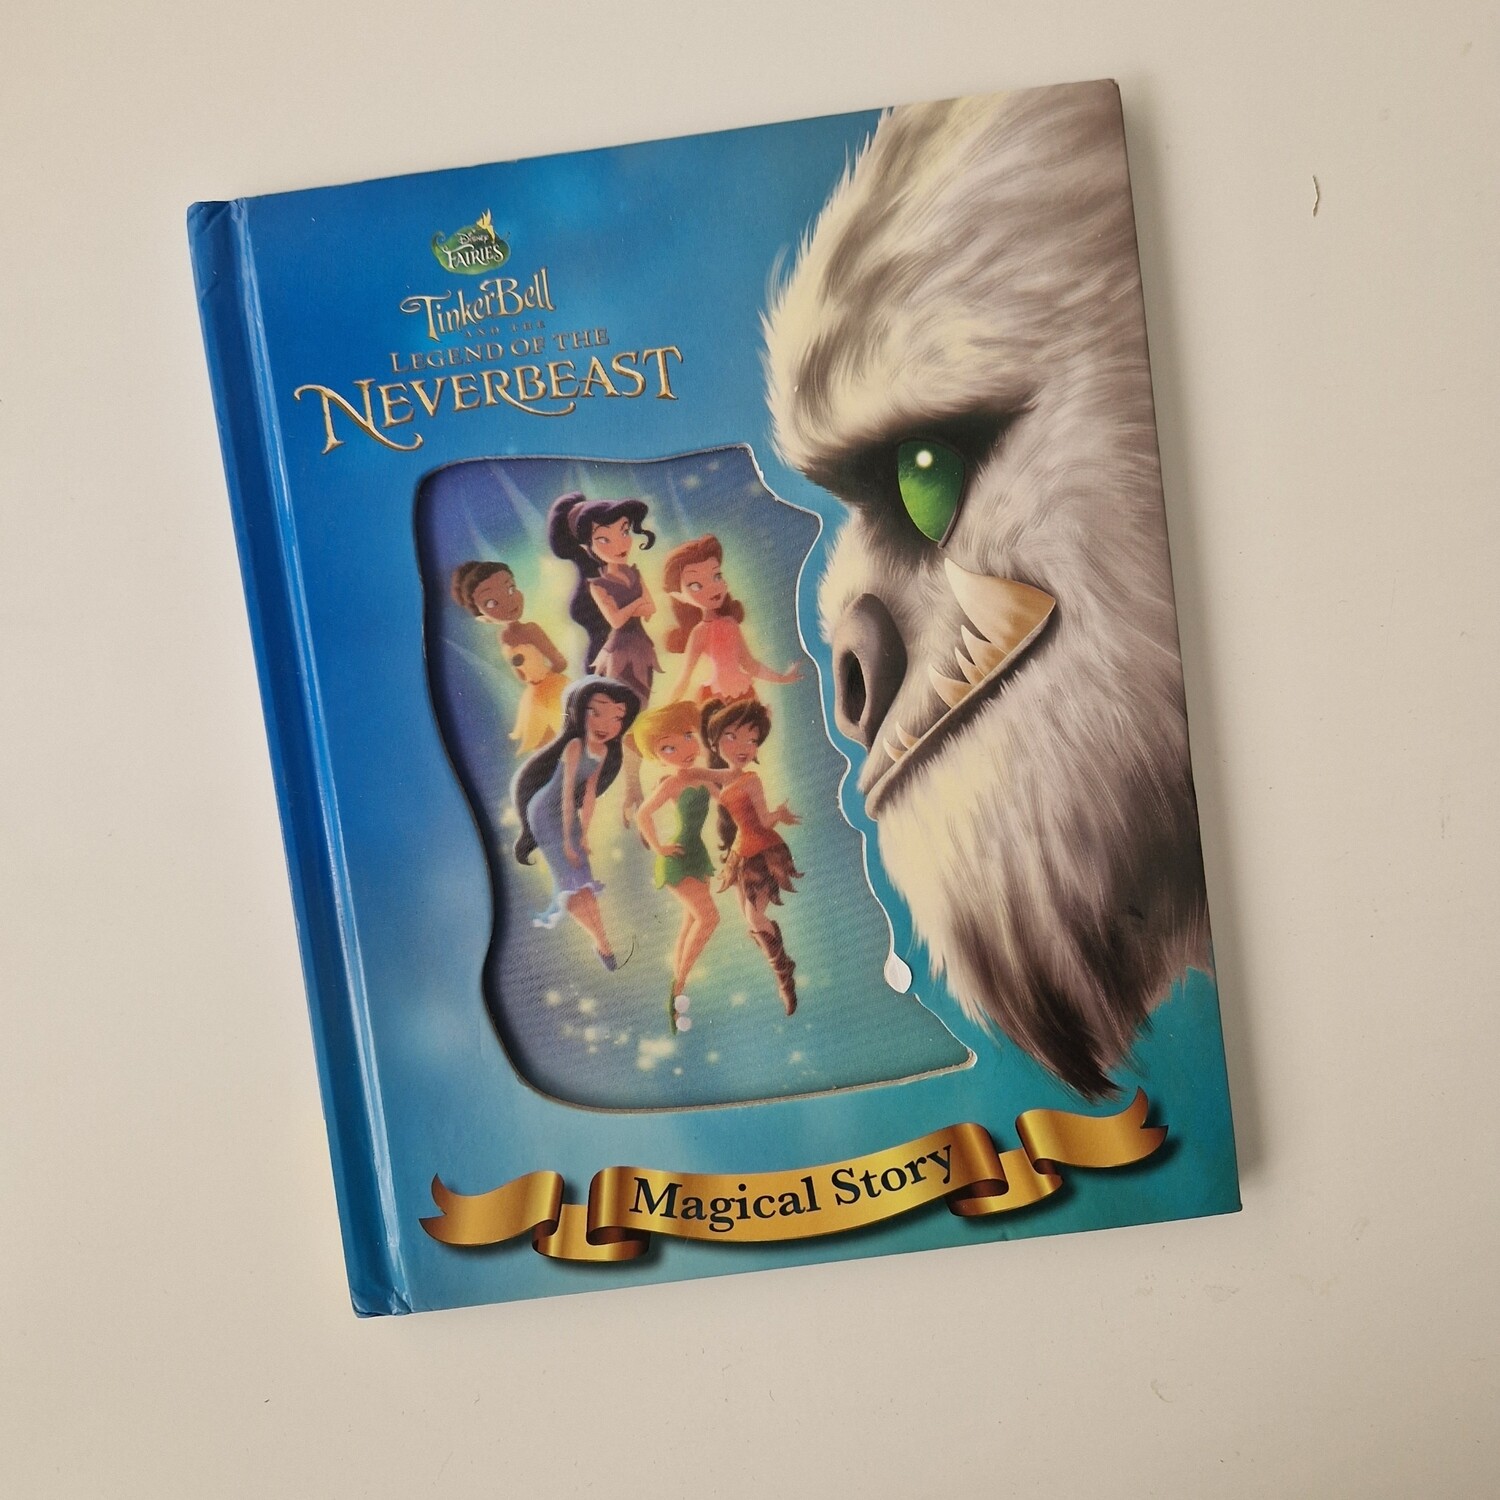 Tinkerbell and the neverbeast Notebook - Lenticular Print